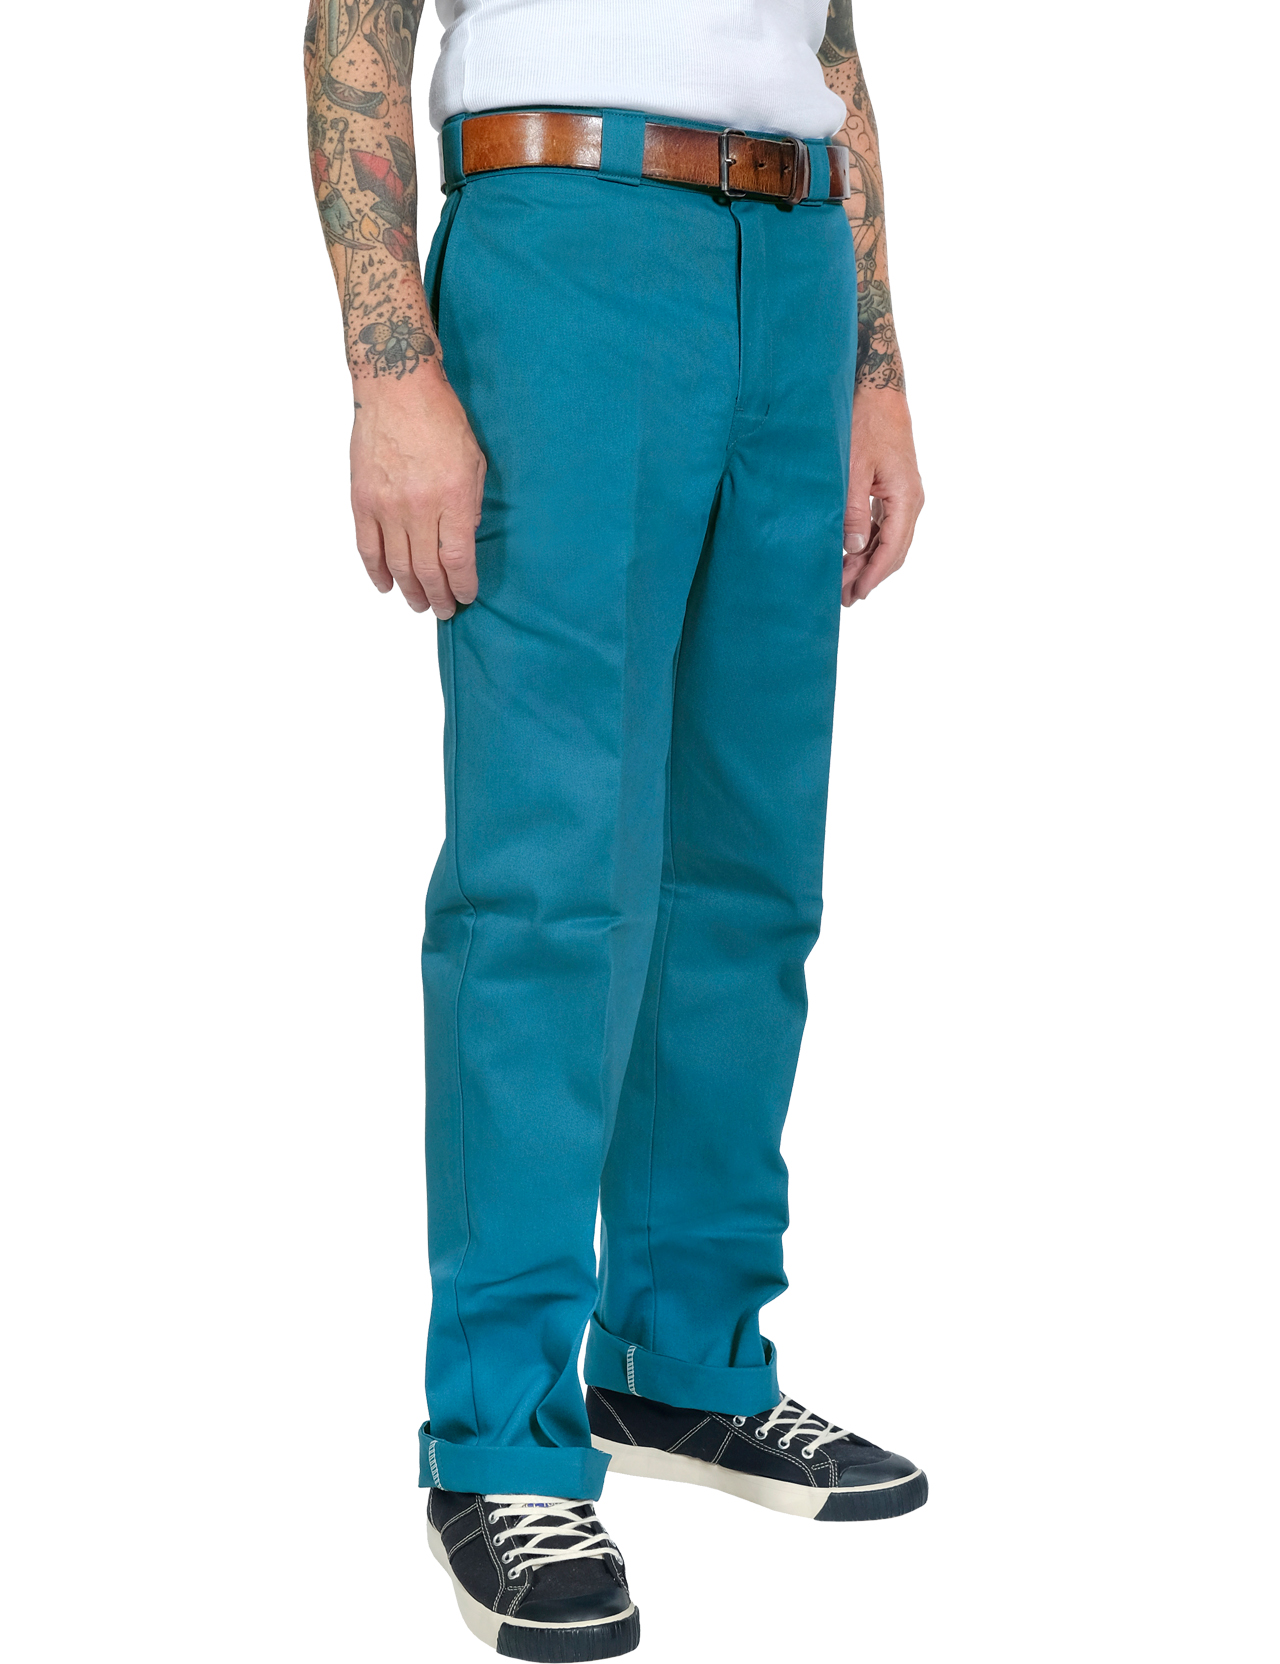 Dickies - O-Dog 874 Traditional Work Pant - Coral Blue